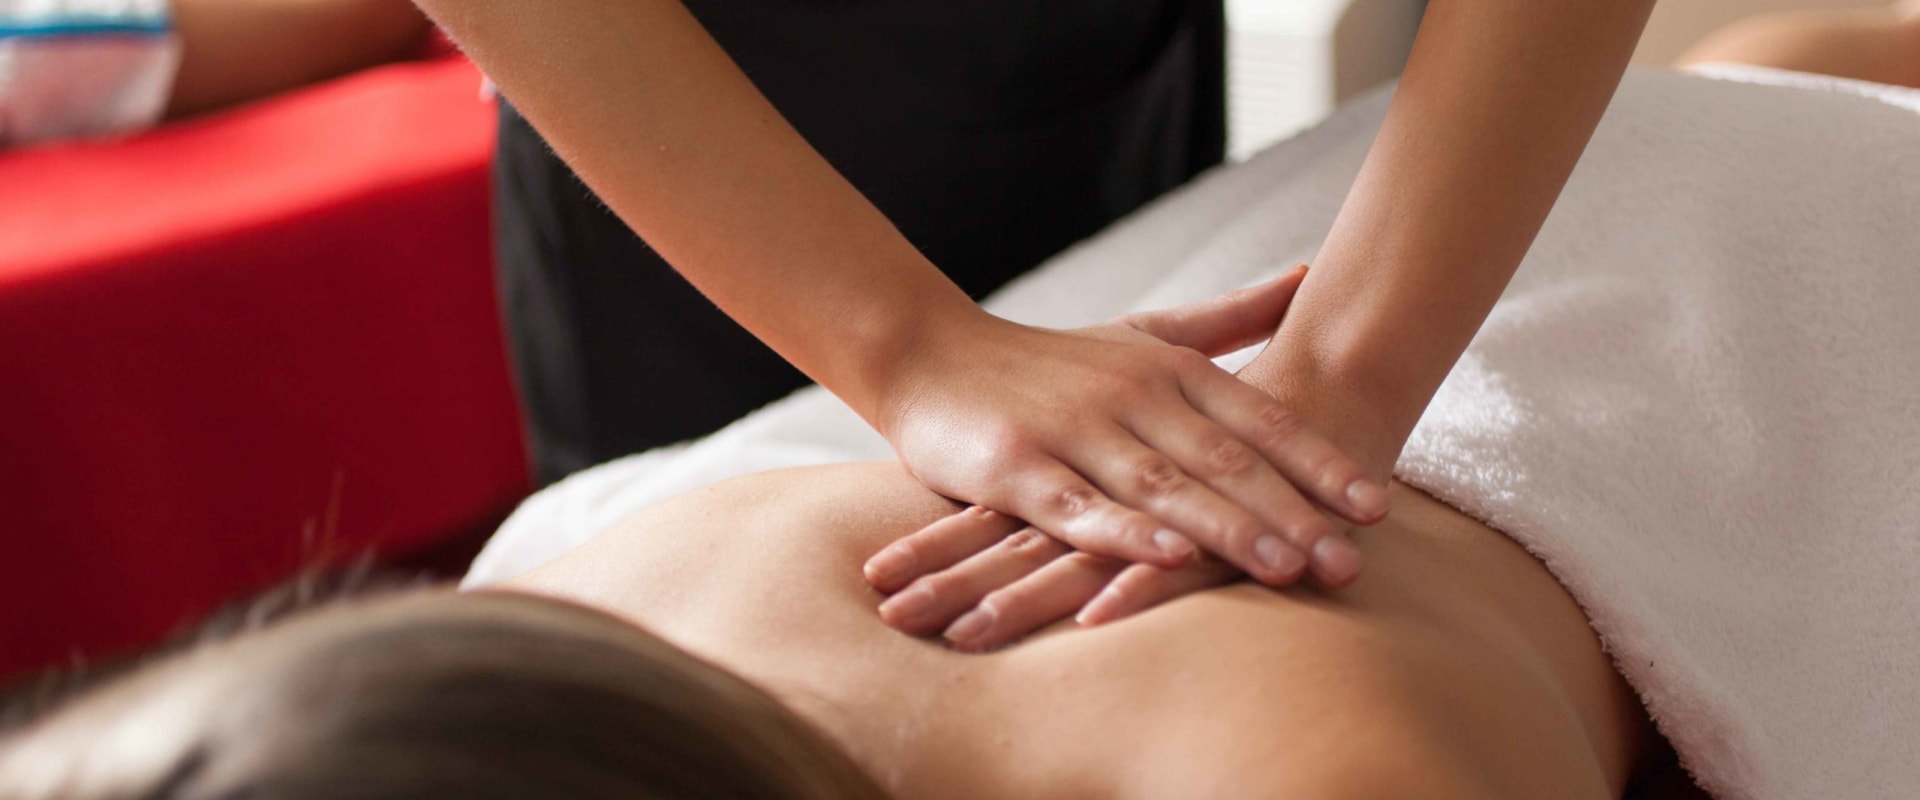 What is Better: Deep Tissue or Swedish Massage?